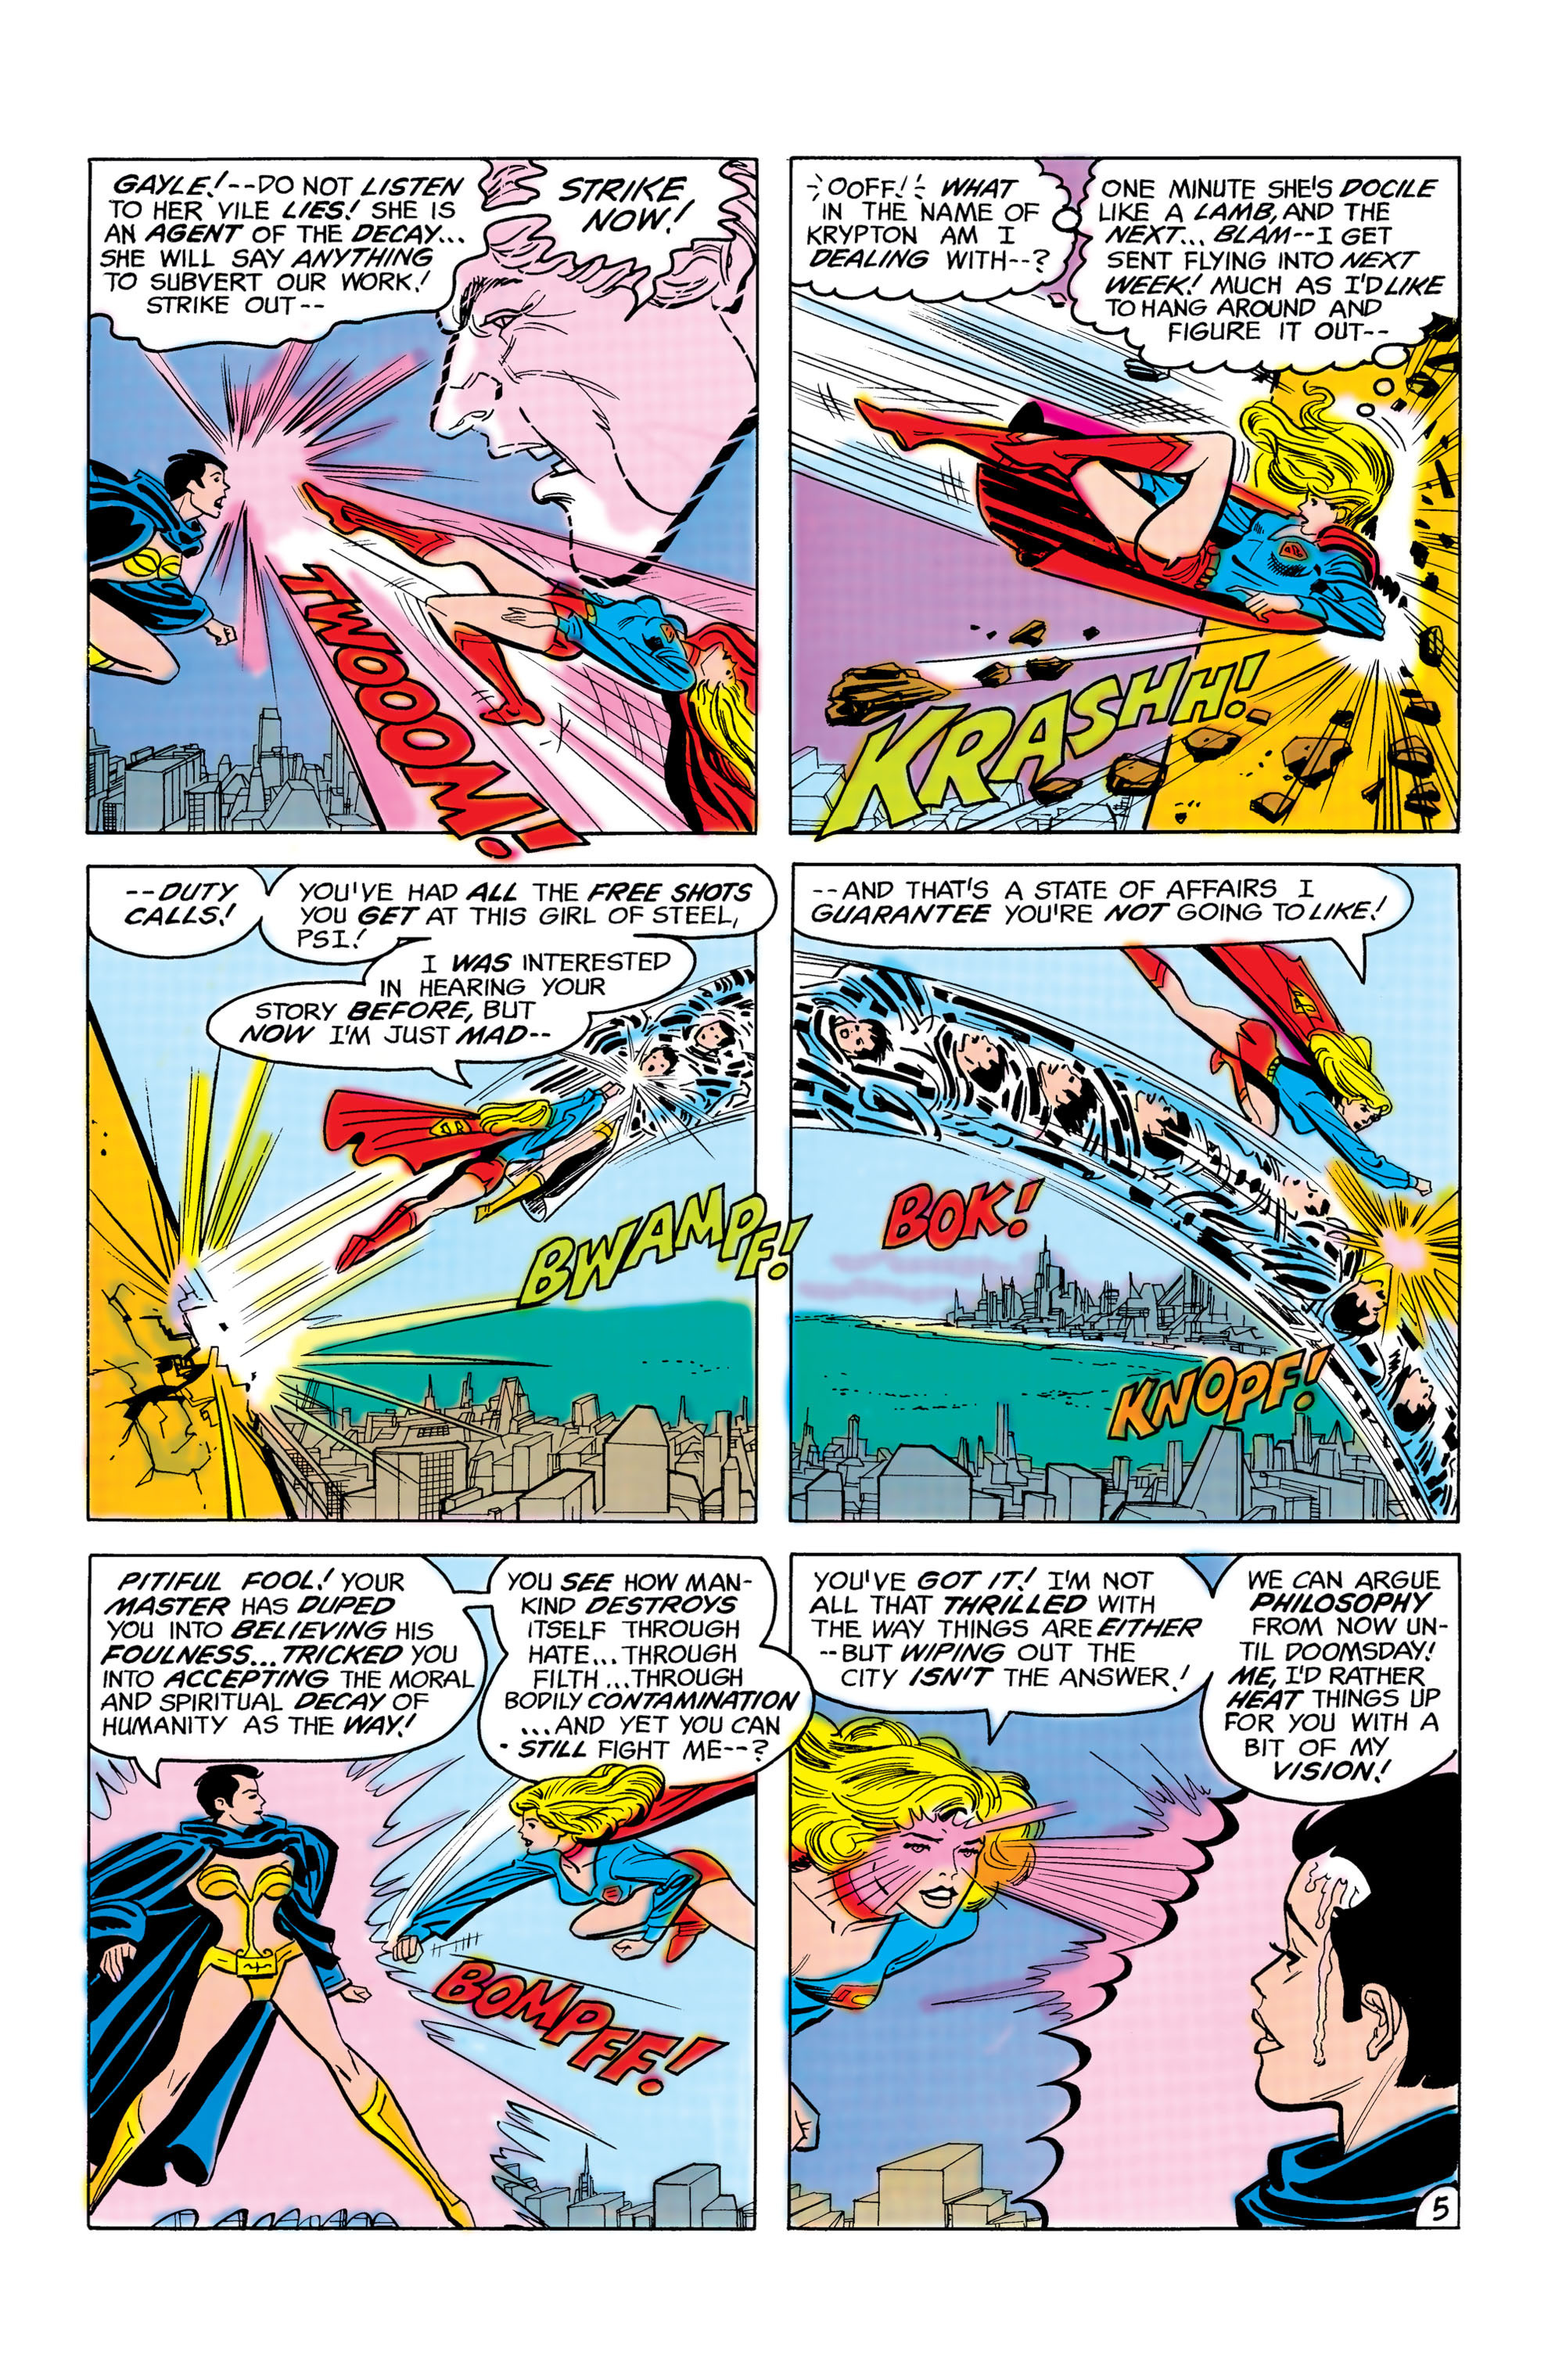 Supergirl (1982) 2 Page 5